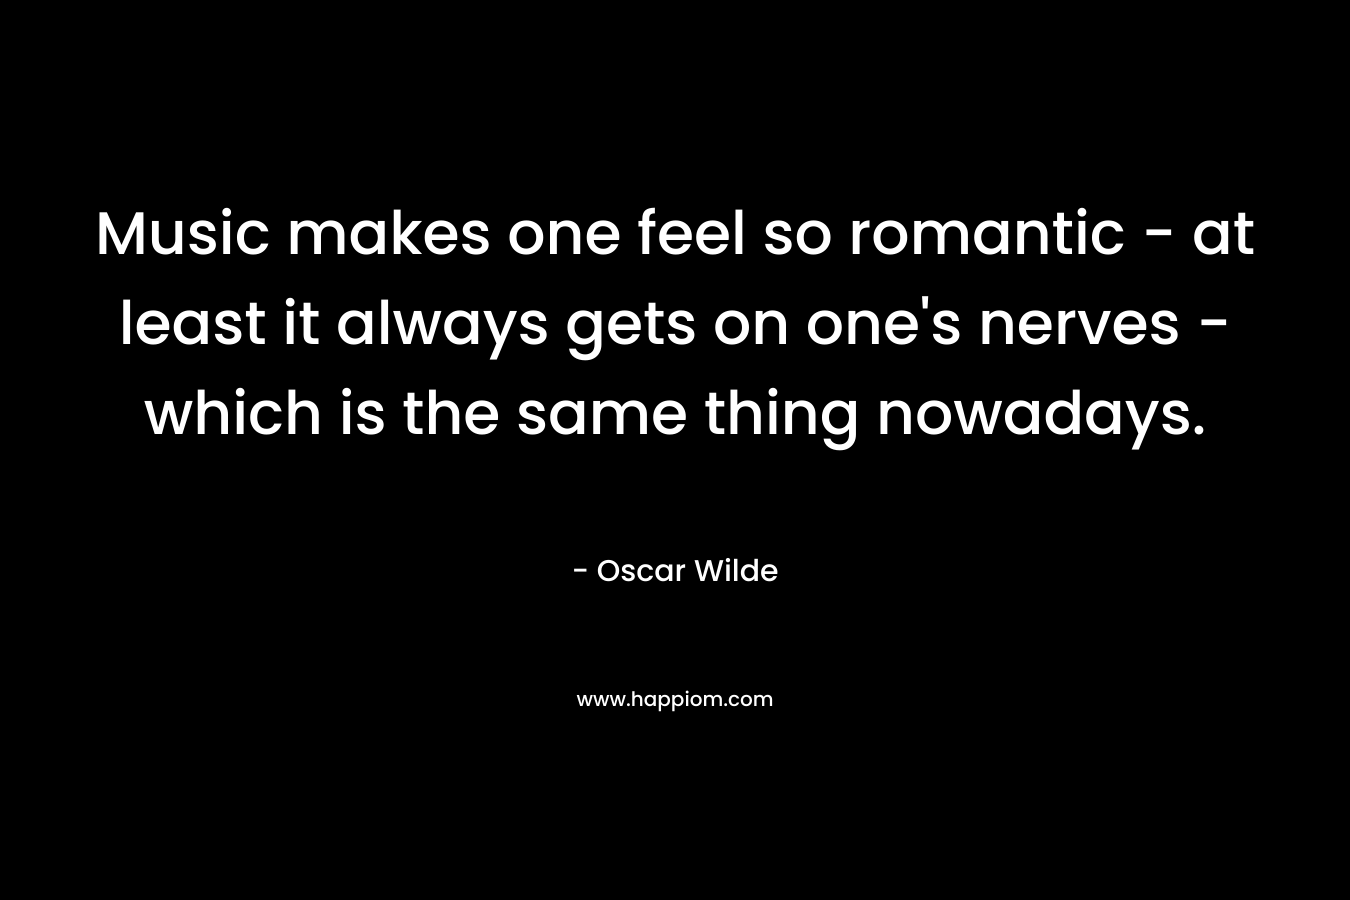 Music makes one feel so romantic - at least it always gets on one's nerves - which is the same thing nowadays.